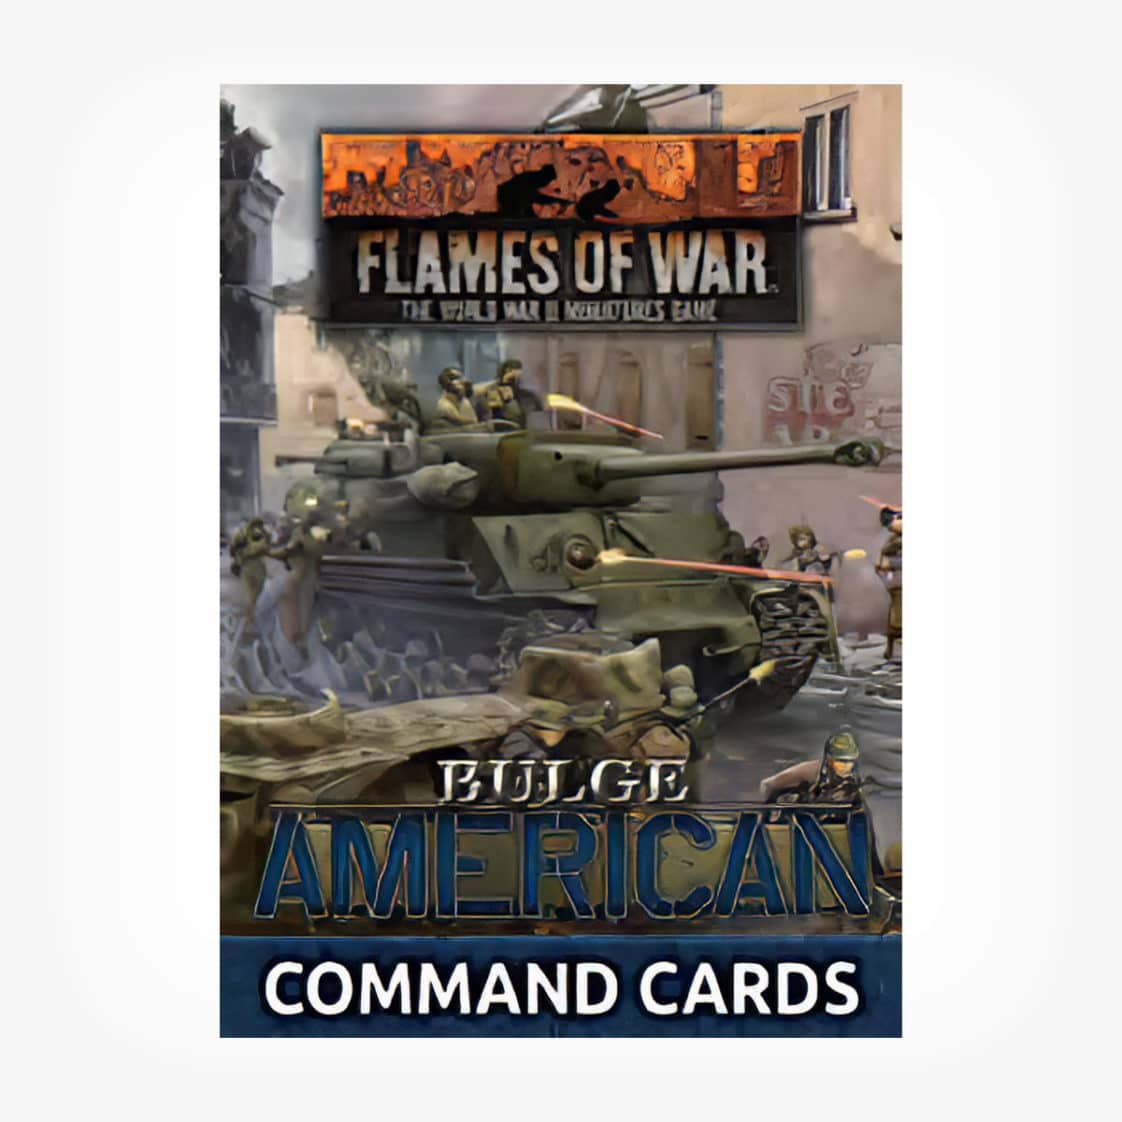 Bulge: American Command Cards